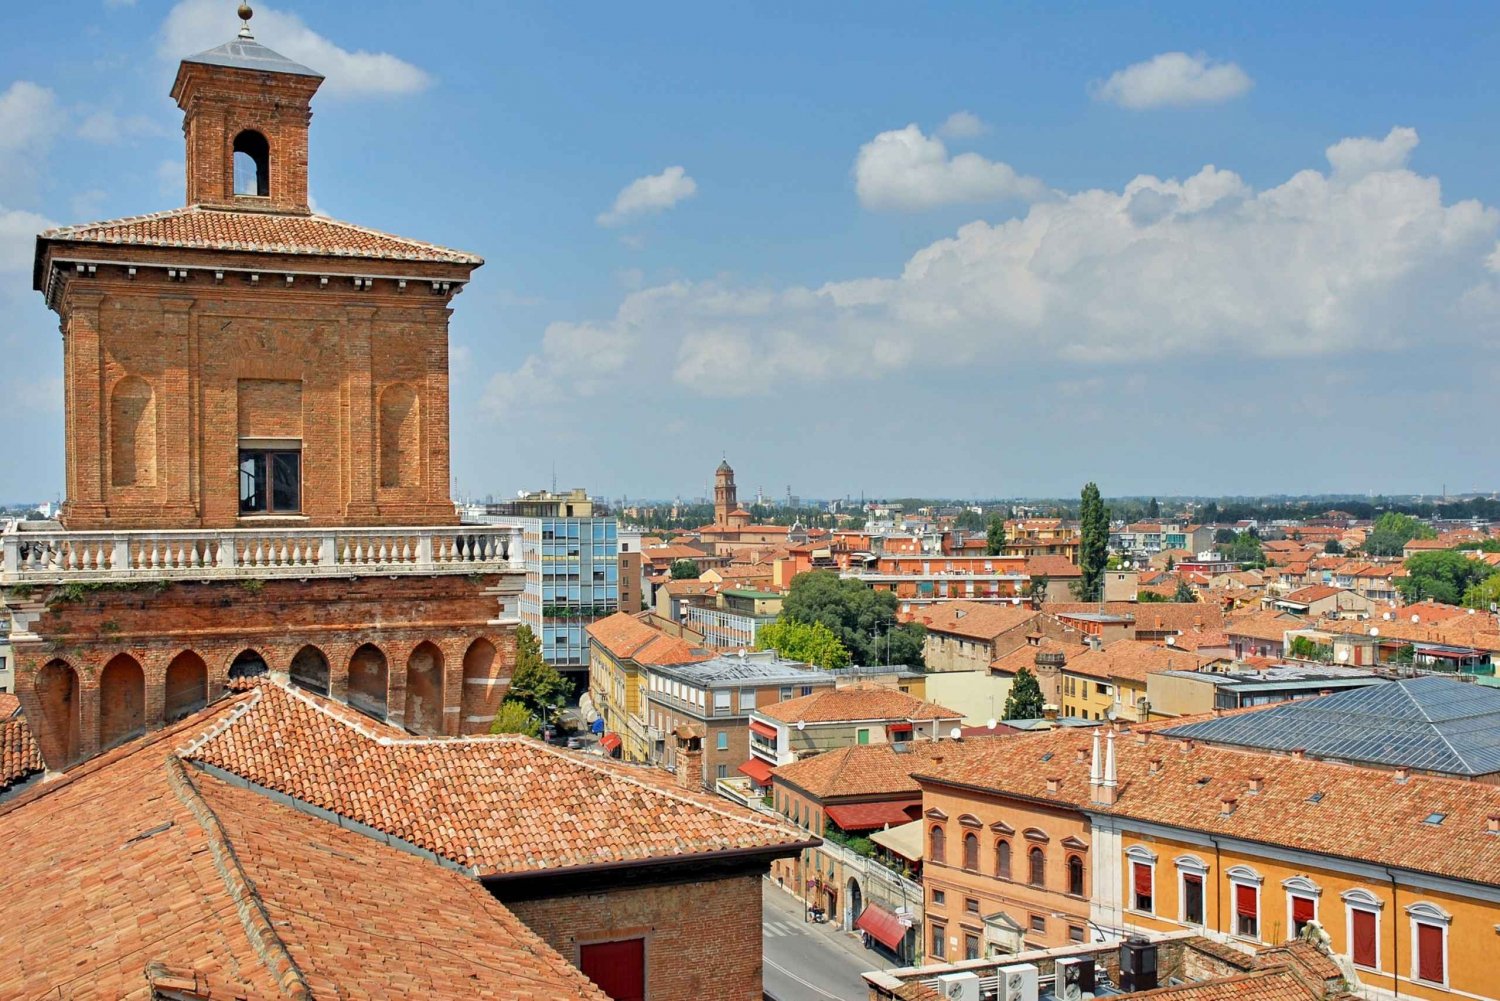 Transfer between Florence and Venice with Sightseeing Stops